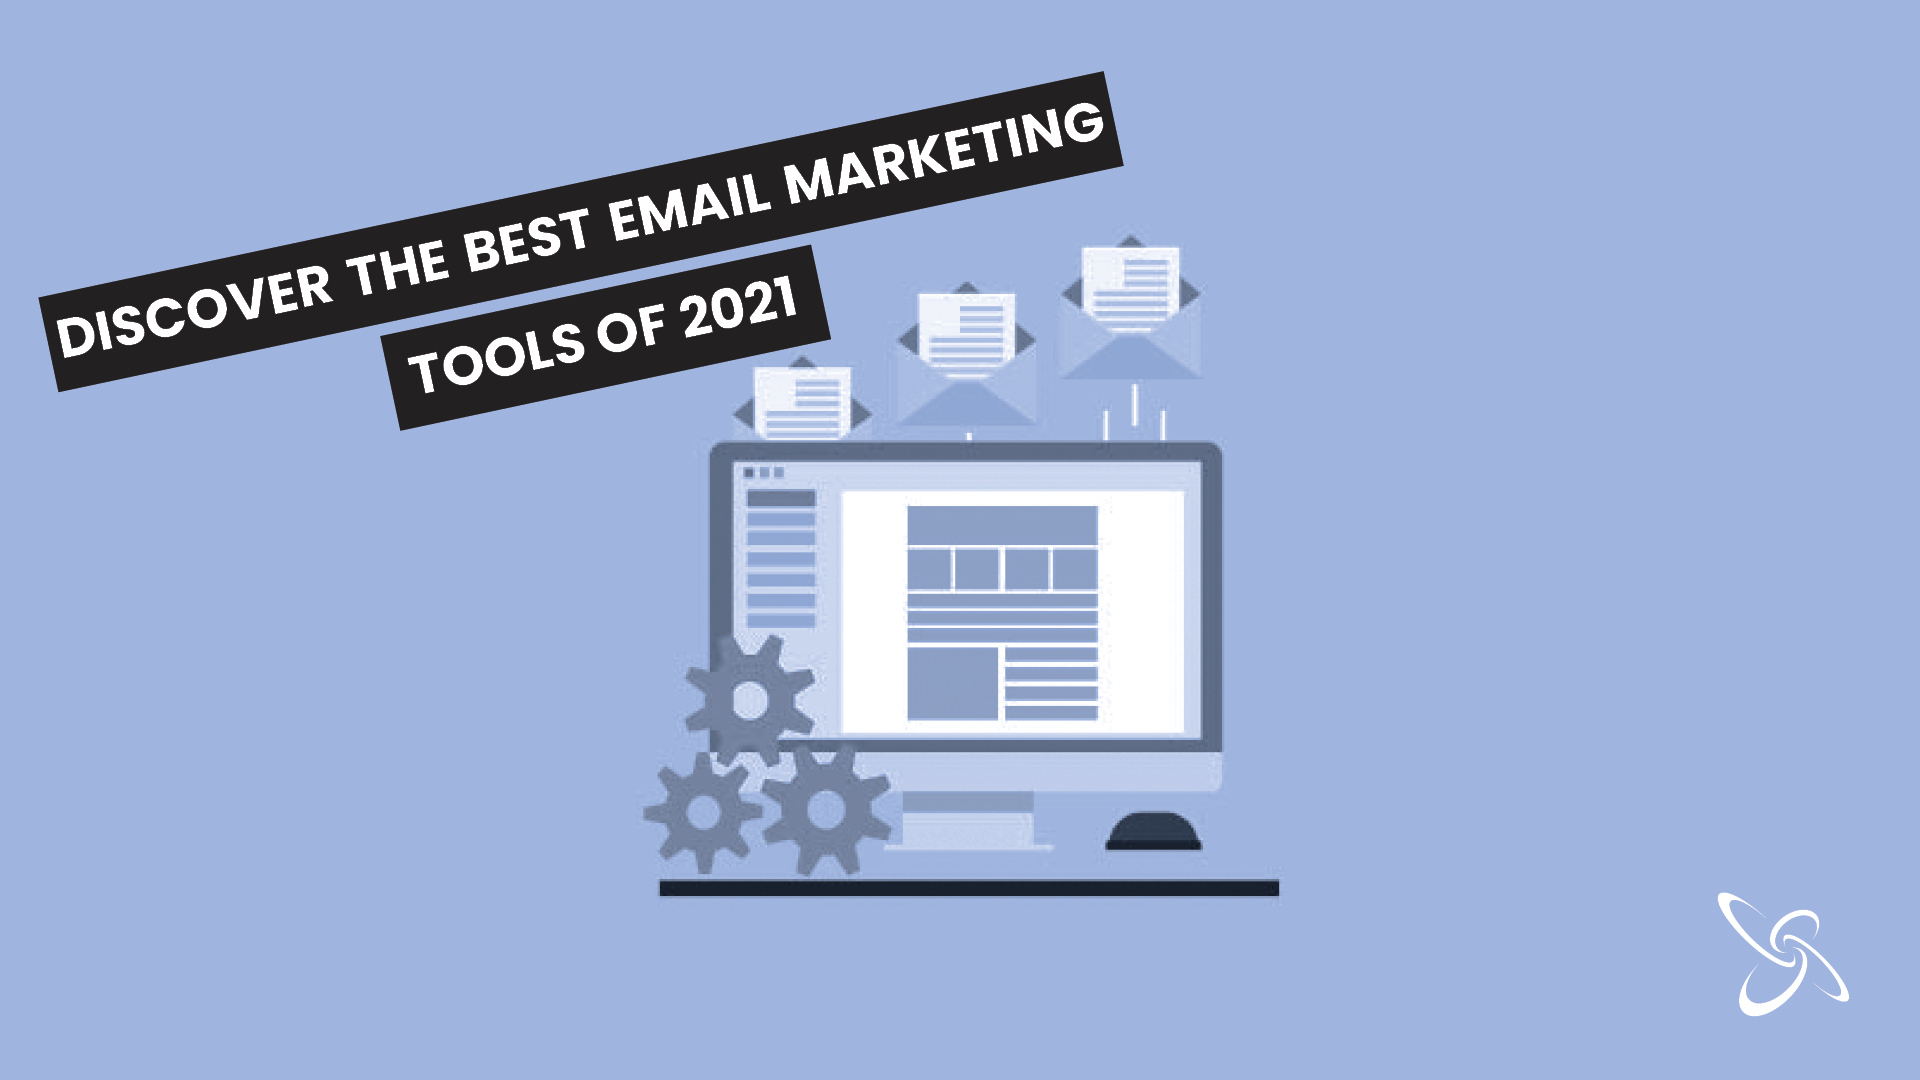 Discover the best email marketing tools of 2021